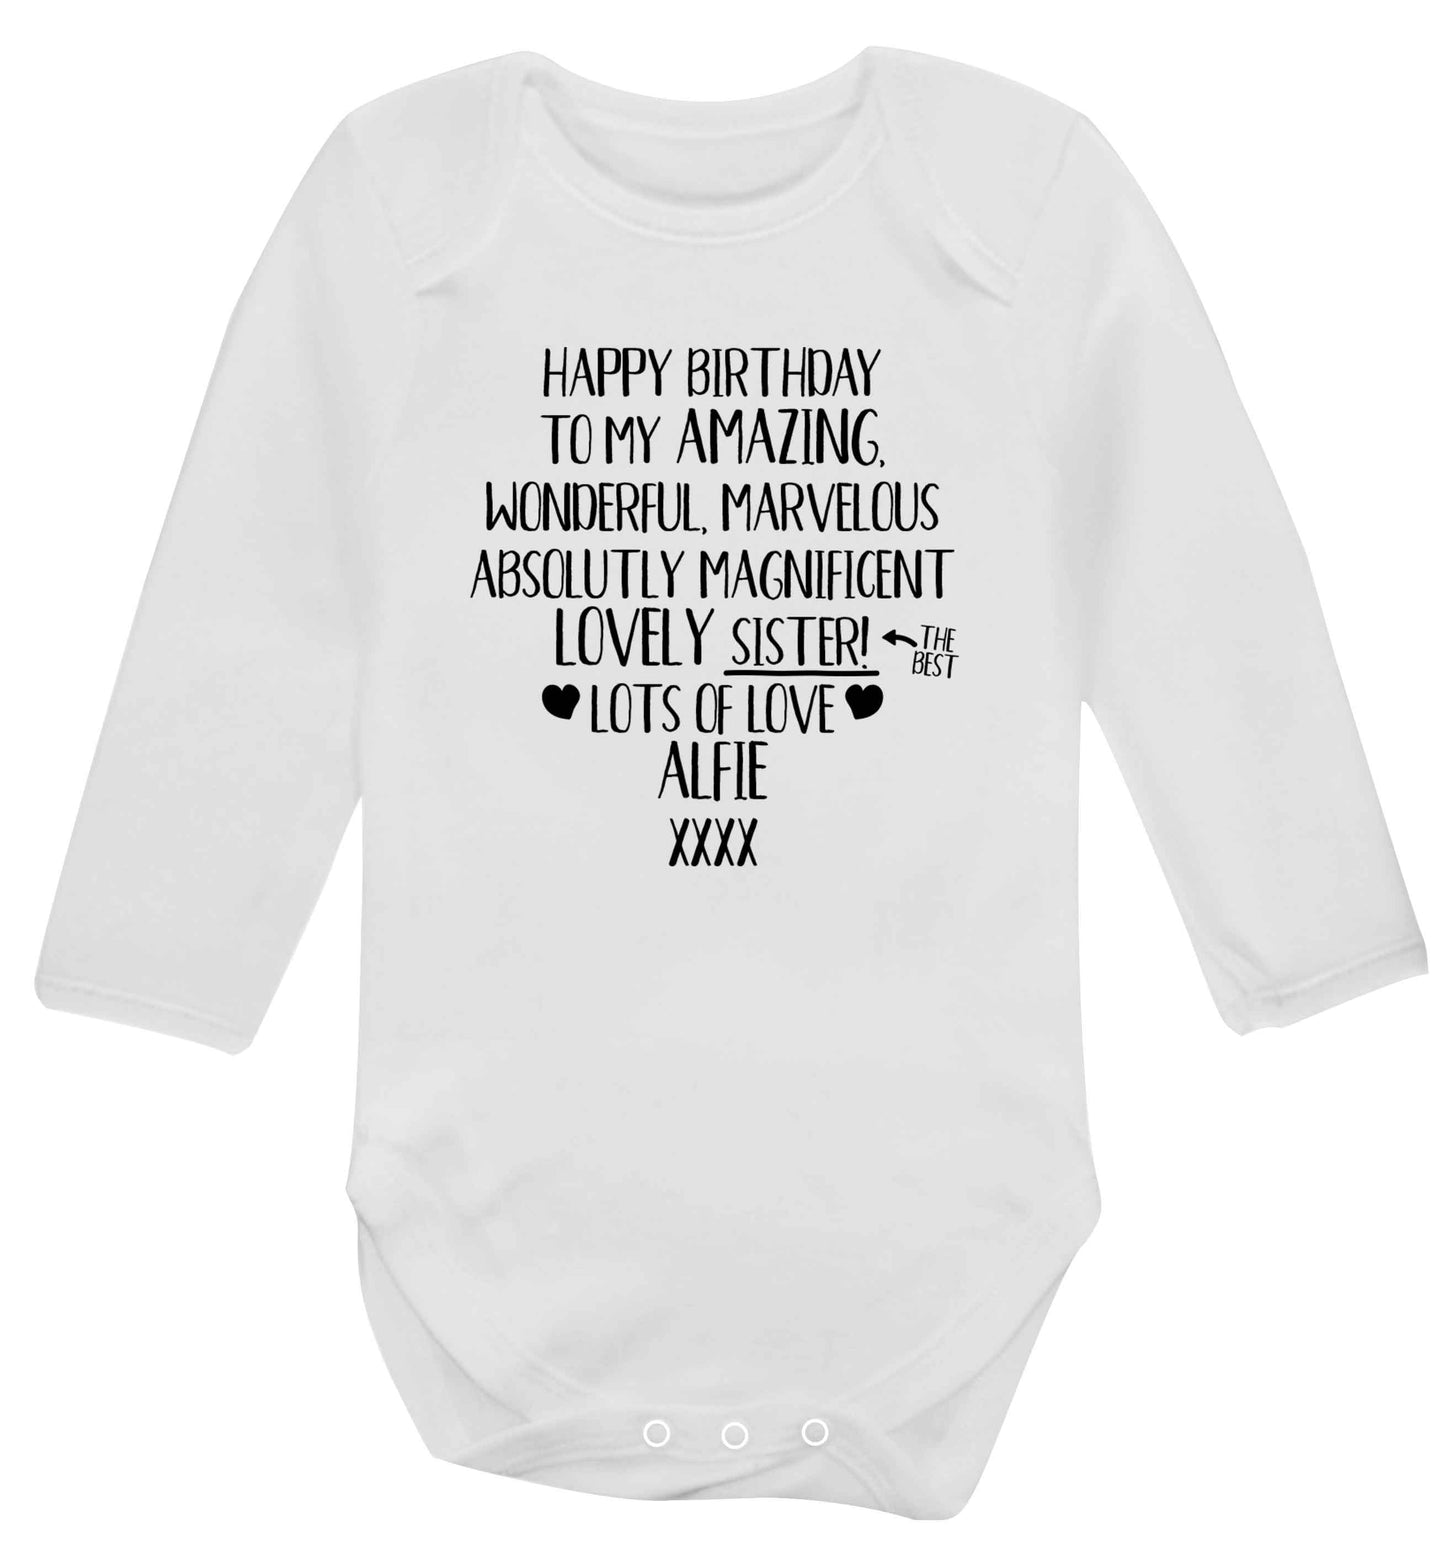 Personalised happy birthday to my amazing, wonderful, lovely sister Baby Vest long sleeved white 6-12 months